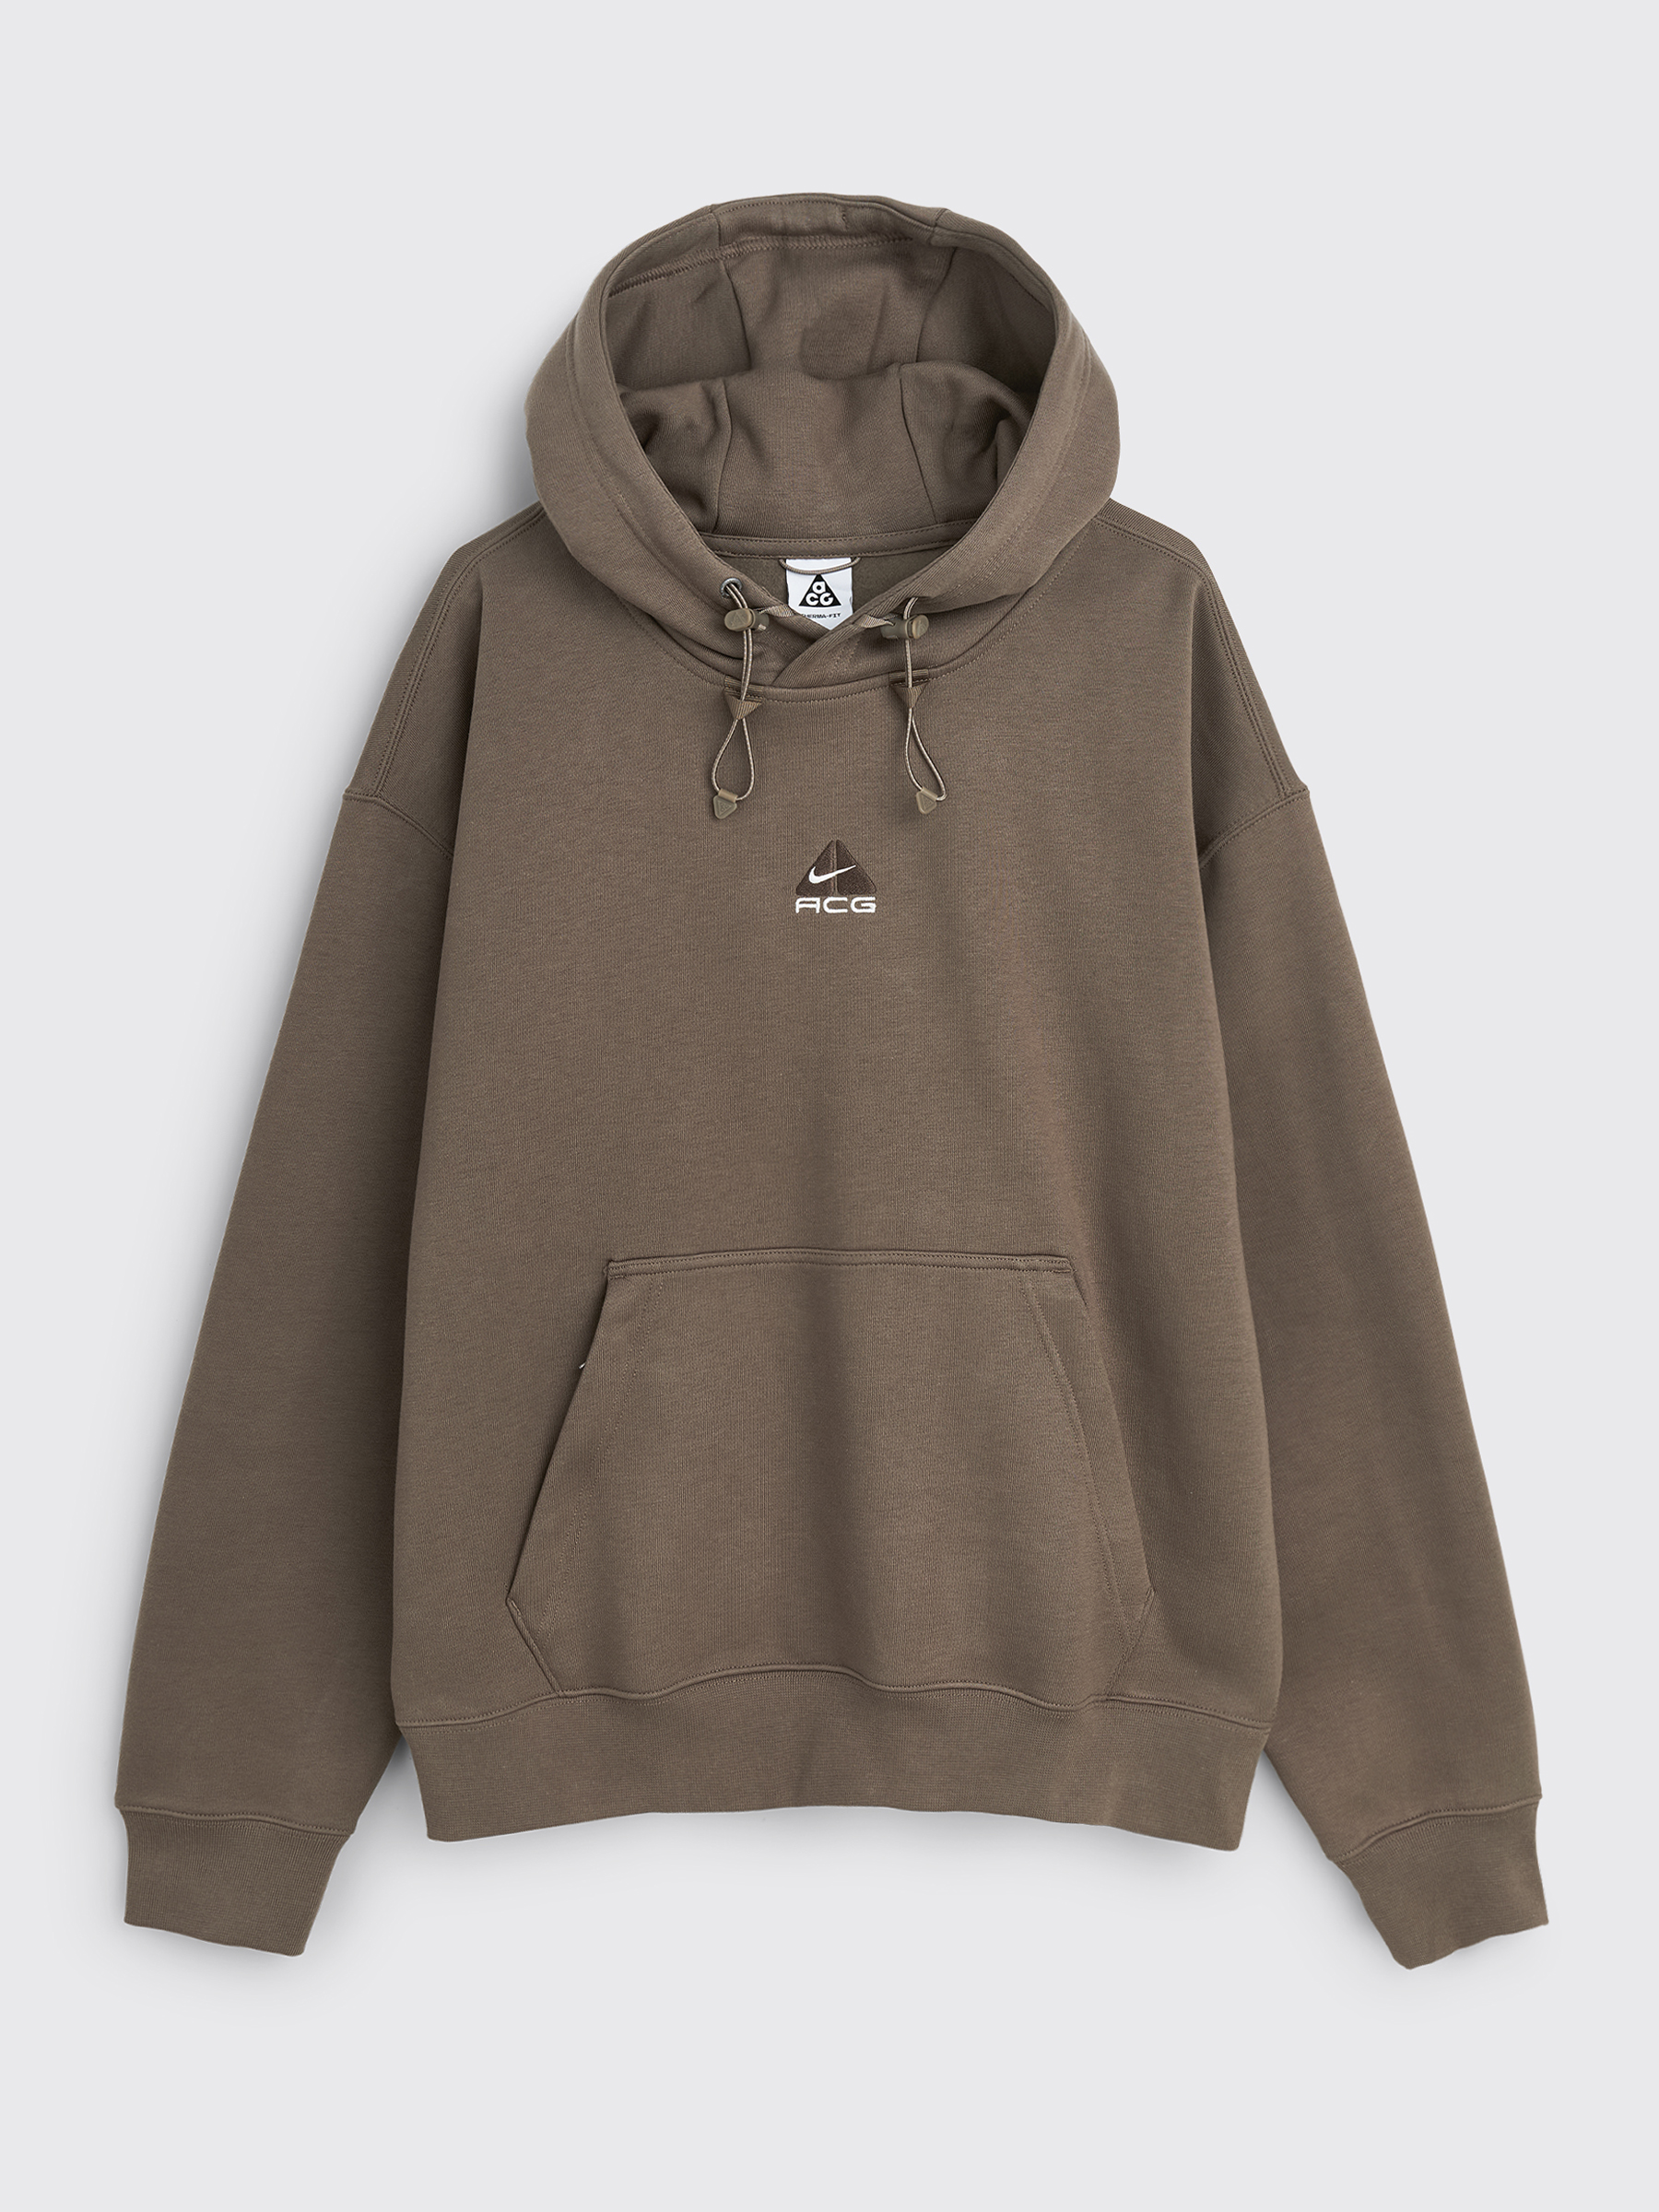 Très Bien - ACG Therma-FIT Hooded Fleece Pullover Sweater Olive Grey